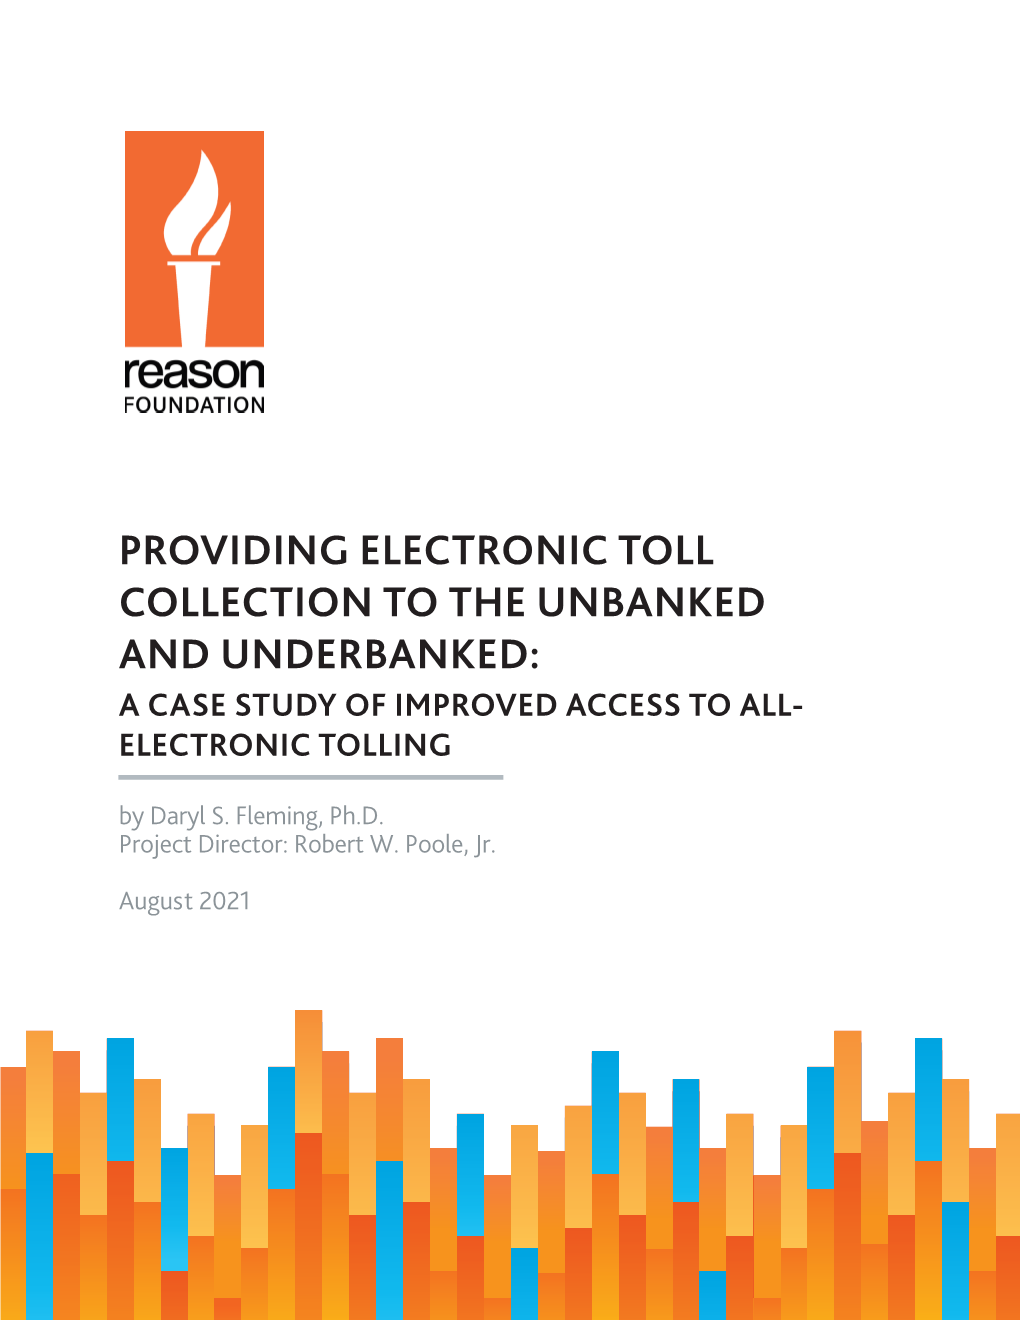 PROVIDING ELECTRONIC TOLL COLLECTION to the UNBANKED and UNDERBANKED: a CASE STUDY of IMPROVED ACCESS to ALL- ELECTRONIC TOLLING by Daryl S